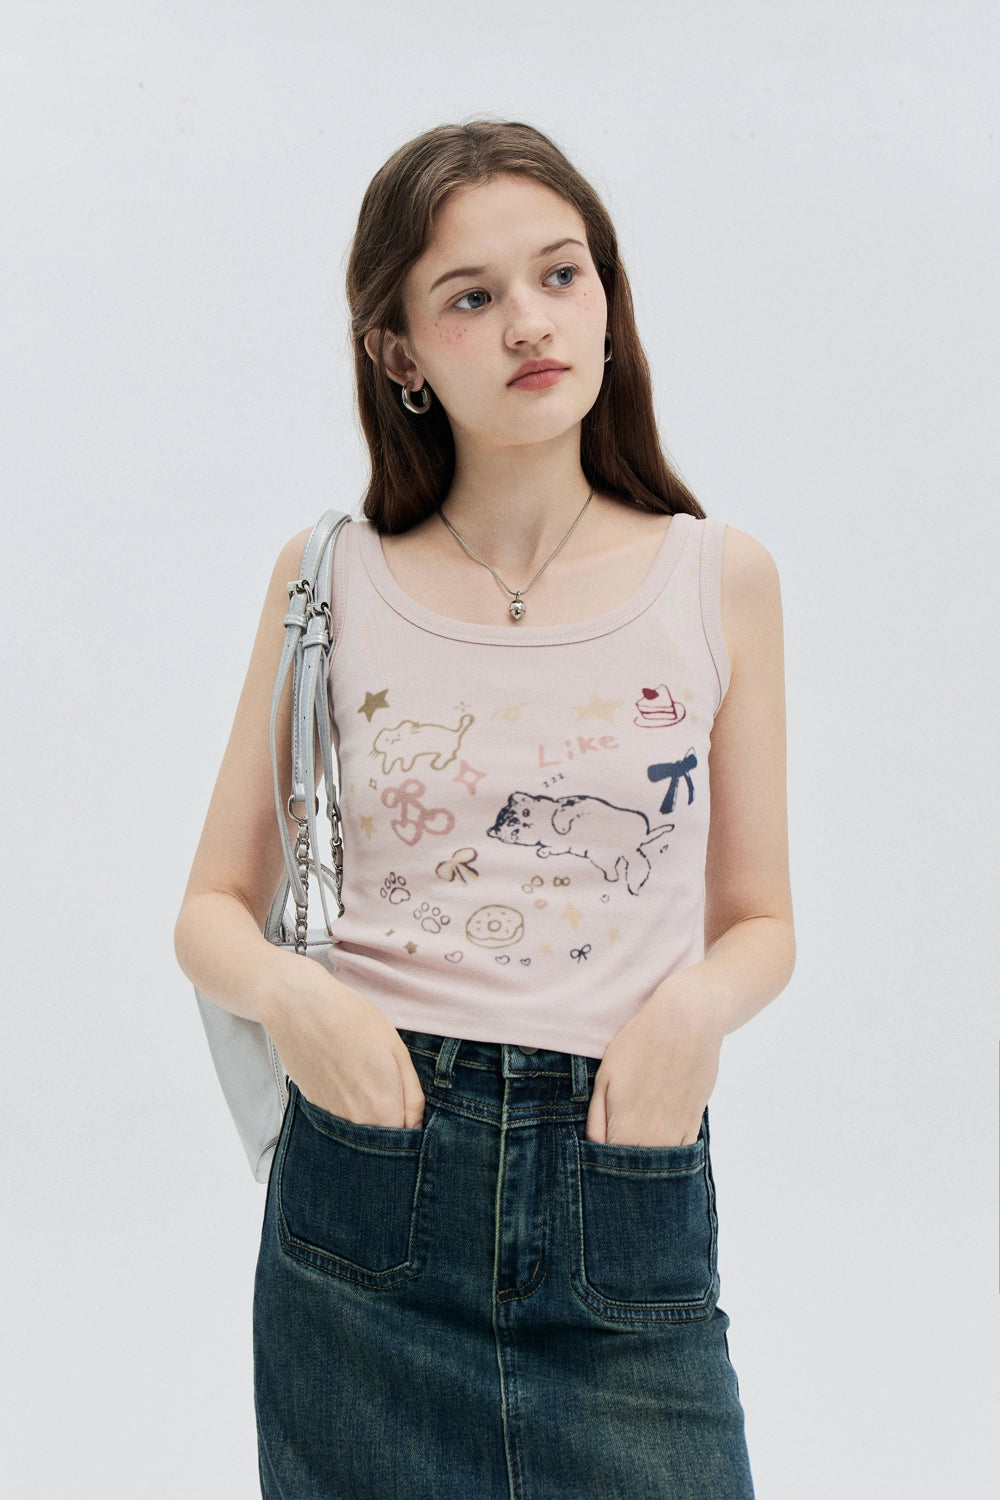 Women's Playful Printed Tank Top with Cute Animal Graphics